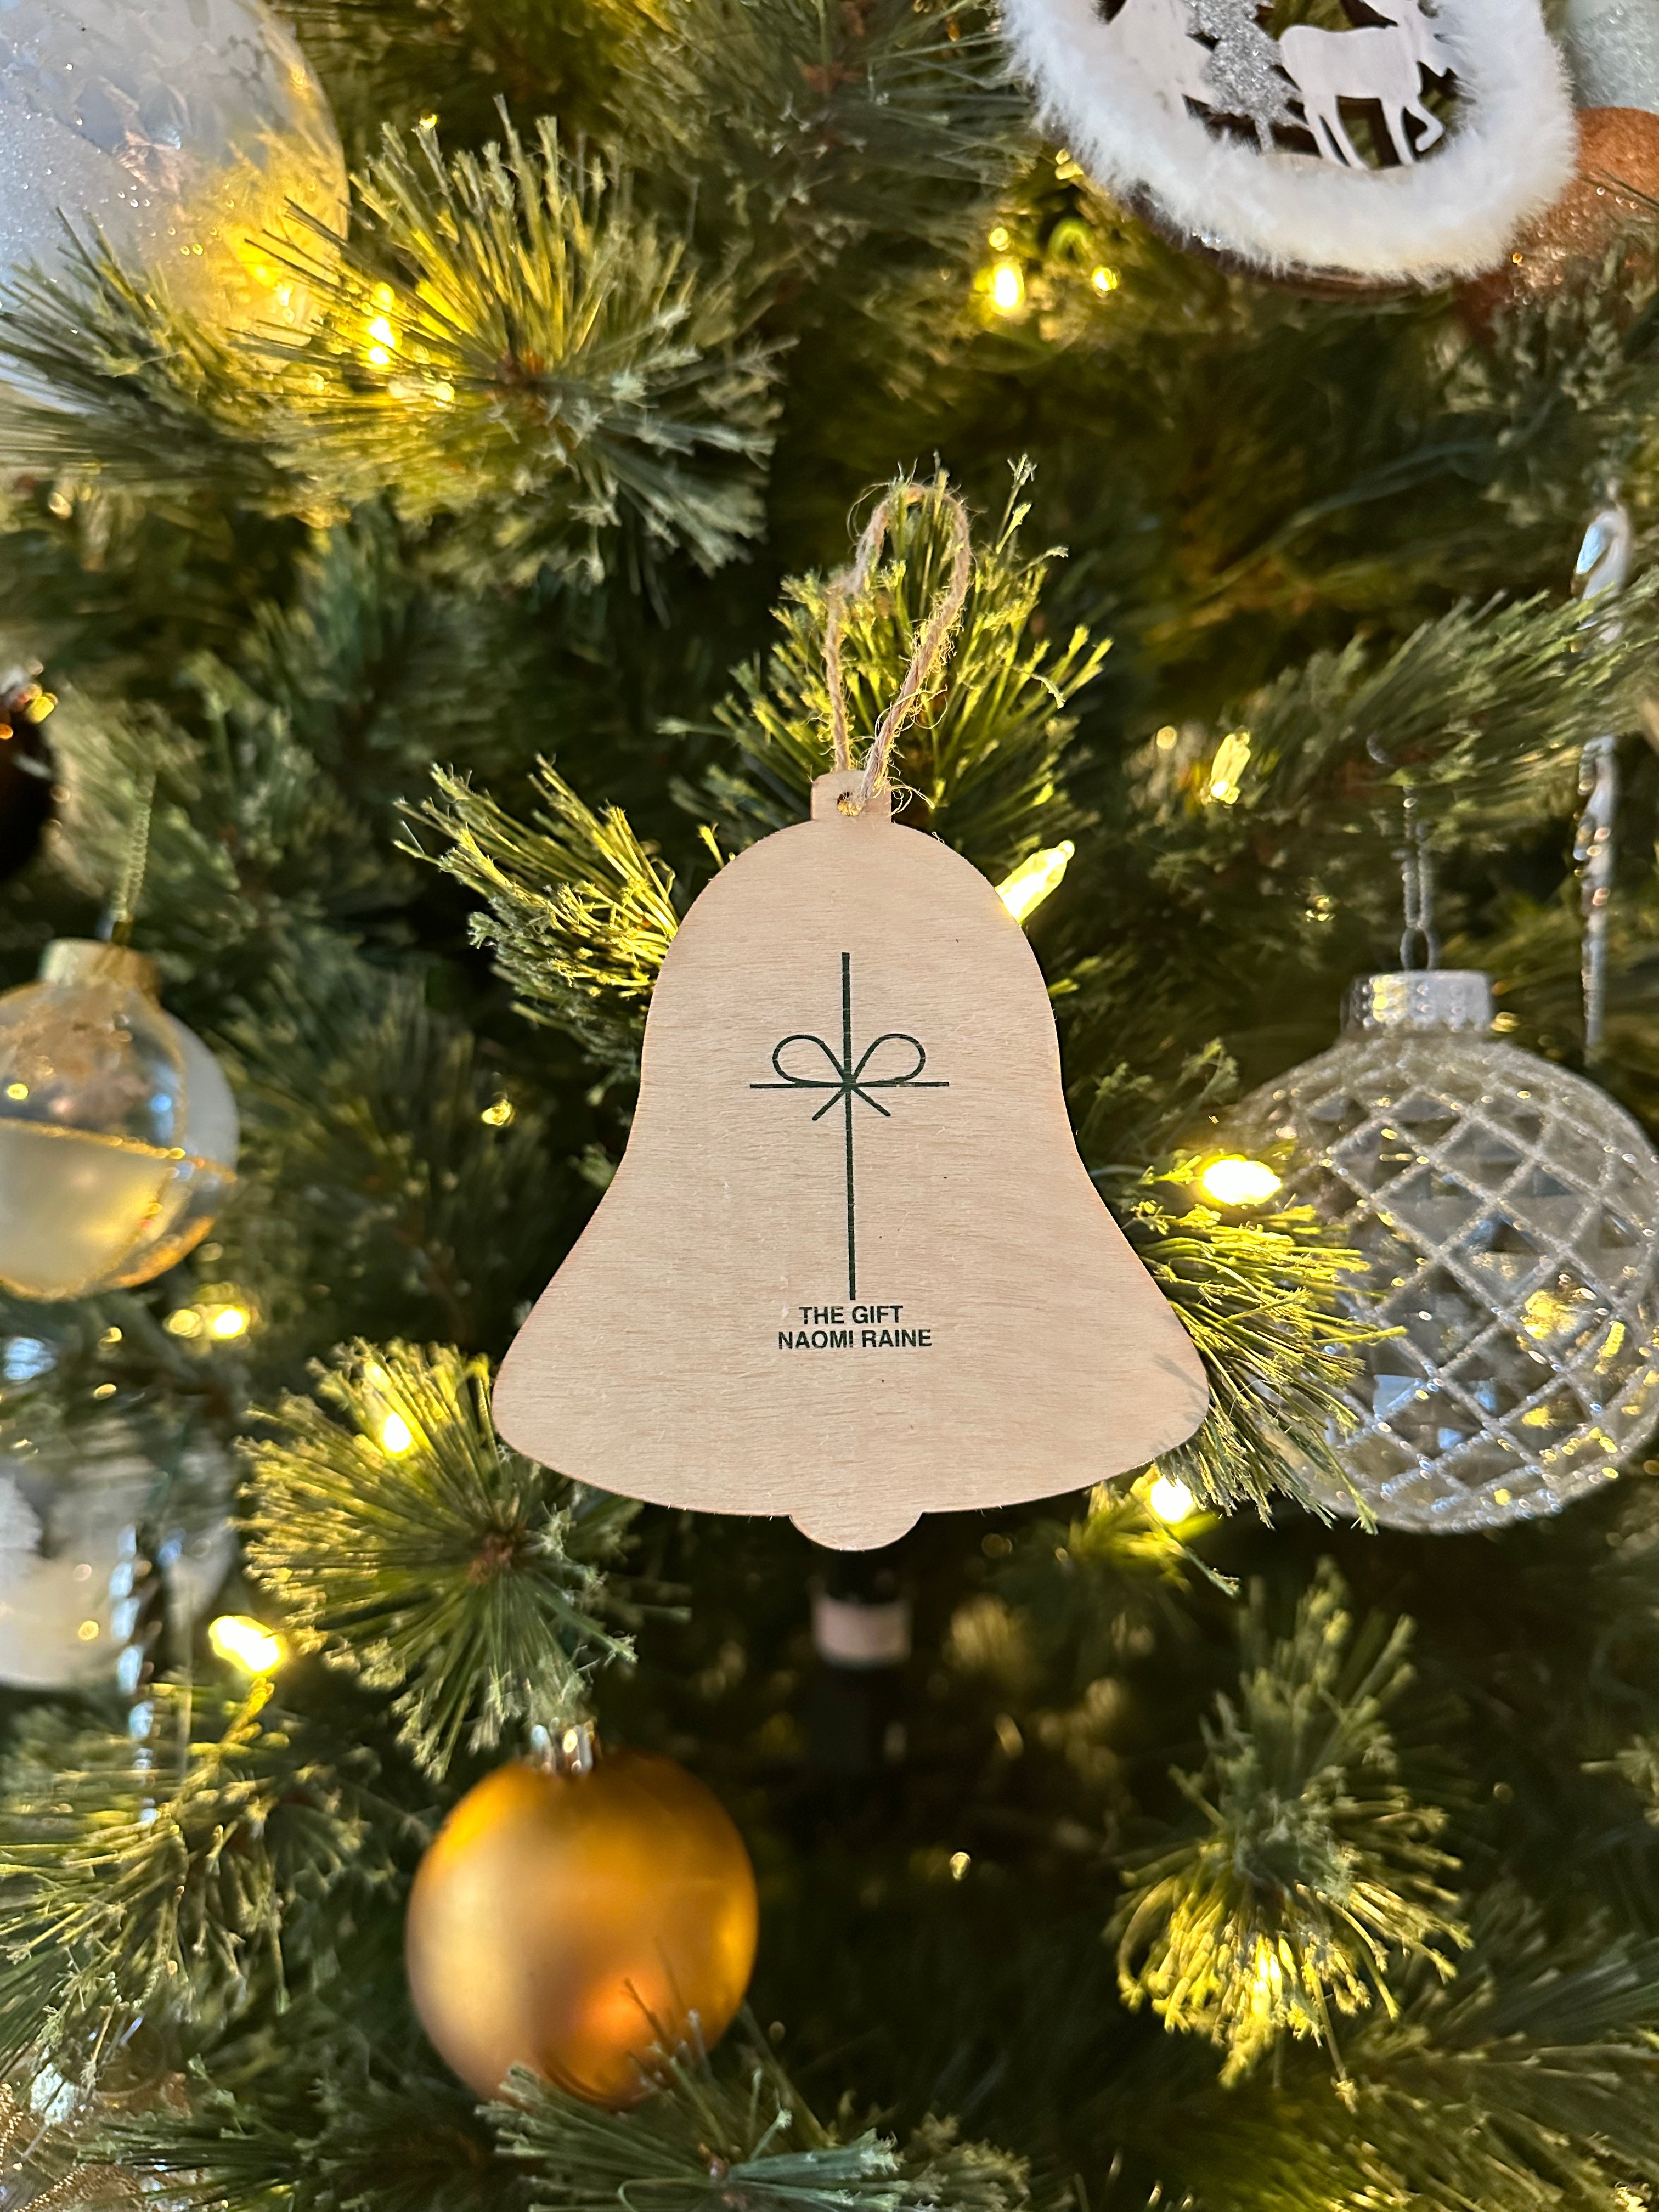 BELL SHAPED ORNAMENT